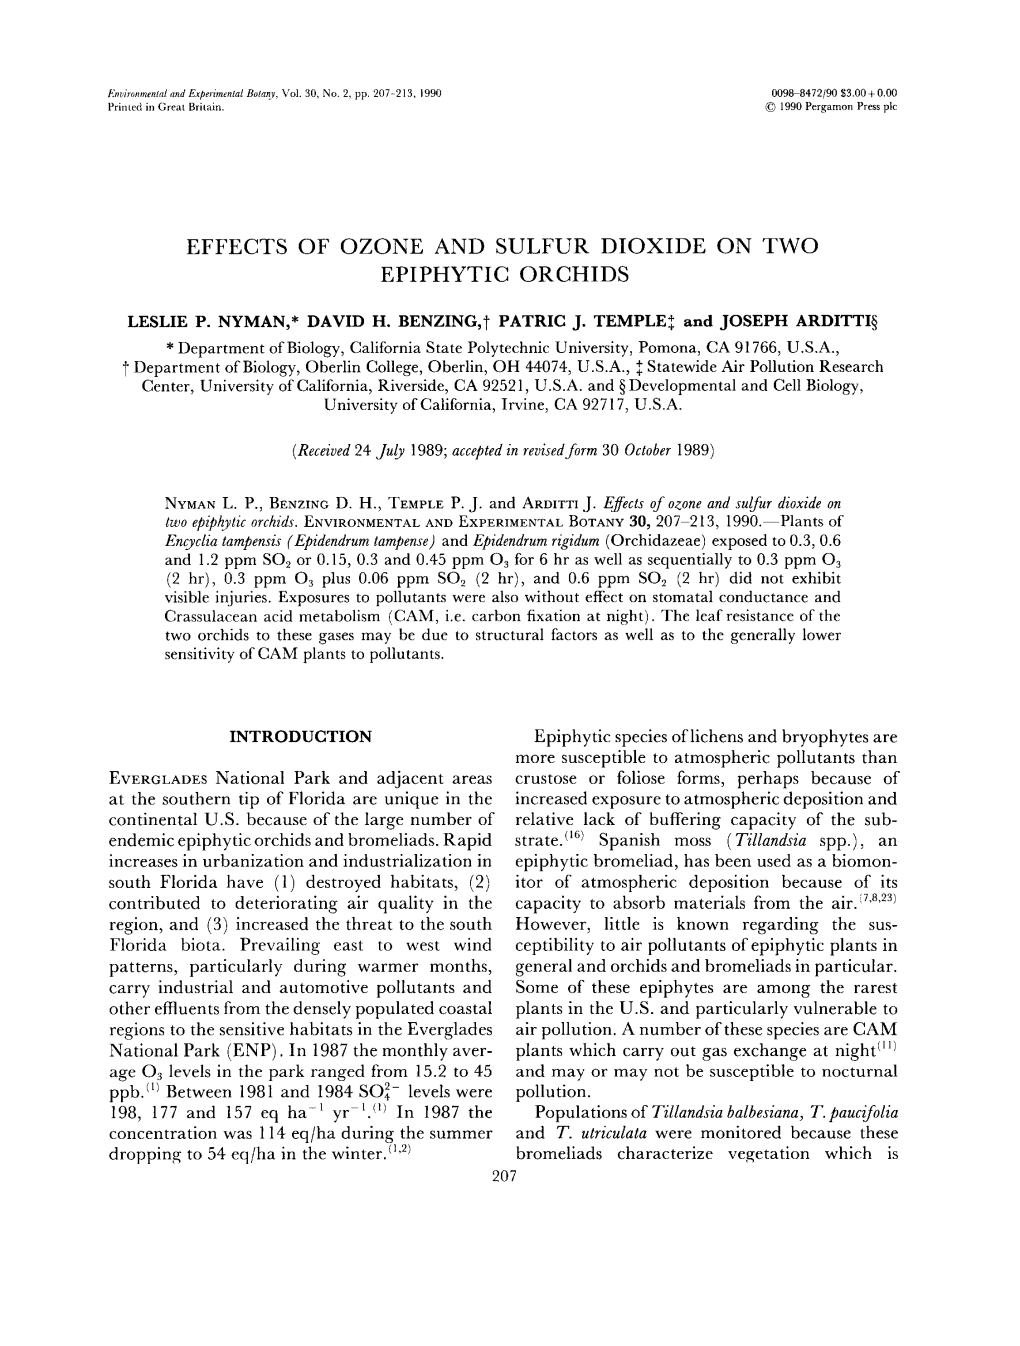 Effects of Ozone and Sulfur Dioxide on Two Epiphytic Orchids